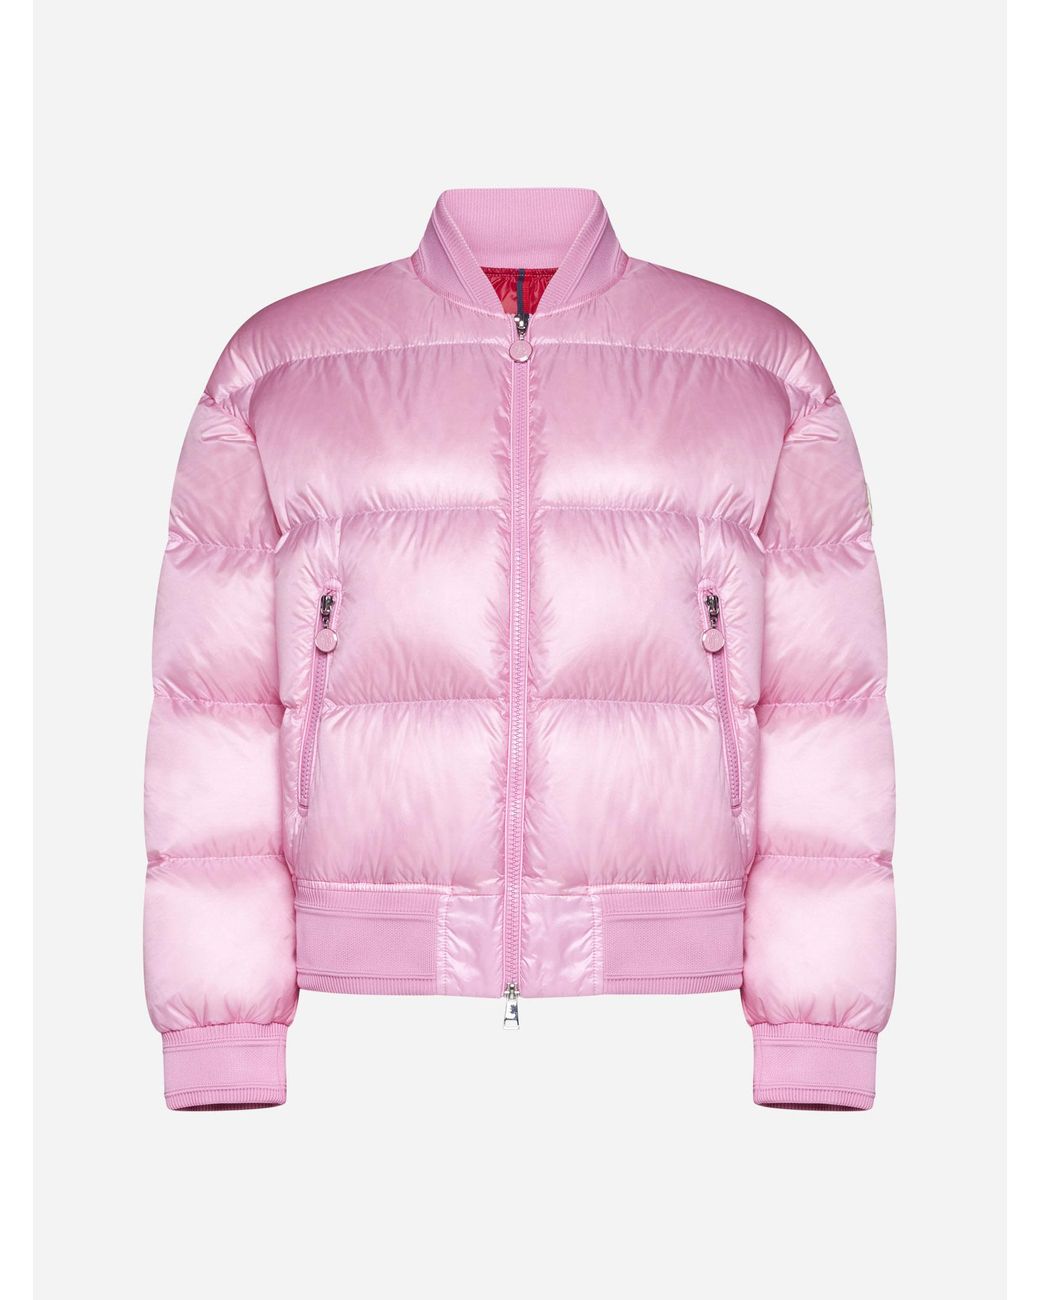 Moncler Merlat Quilted Nylon Down Bomber Jacket in Pink | Lyst